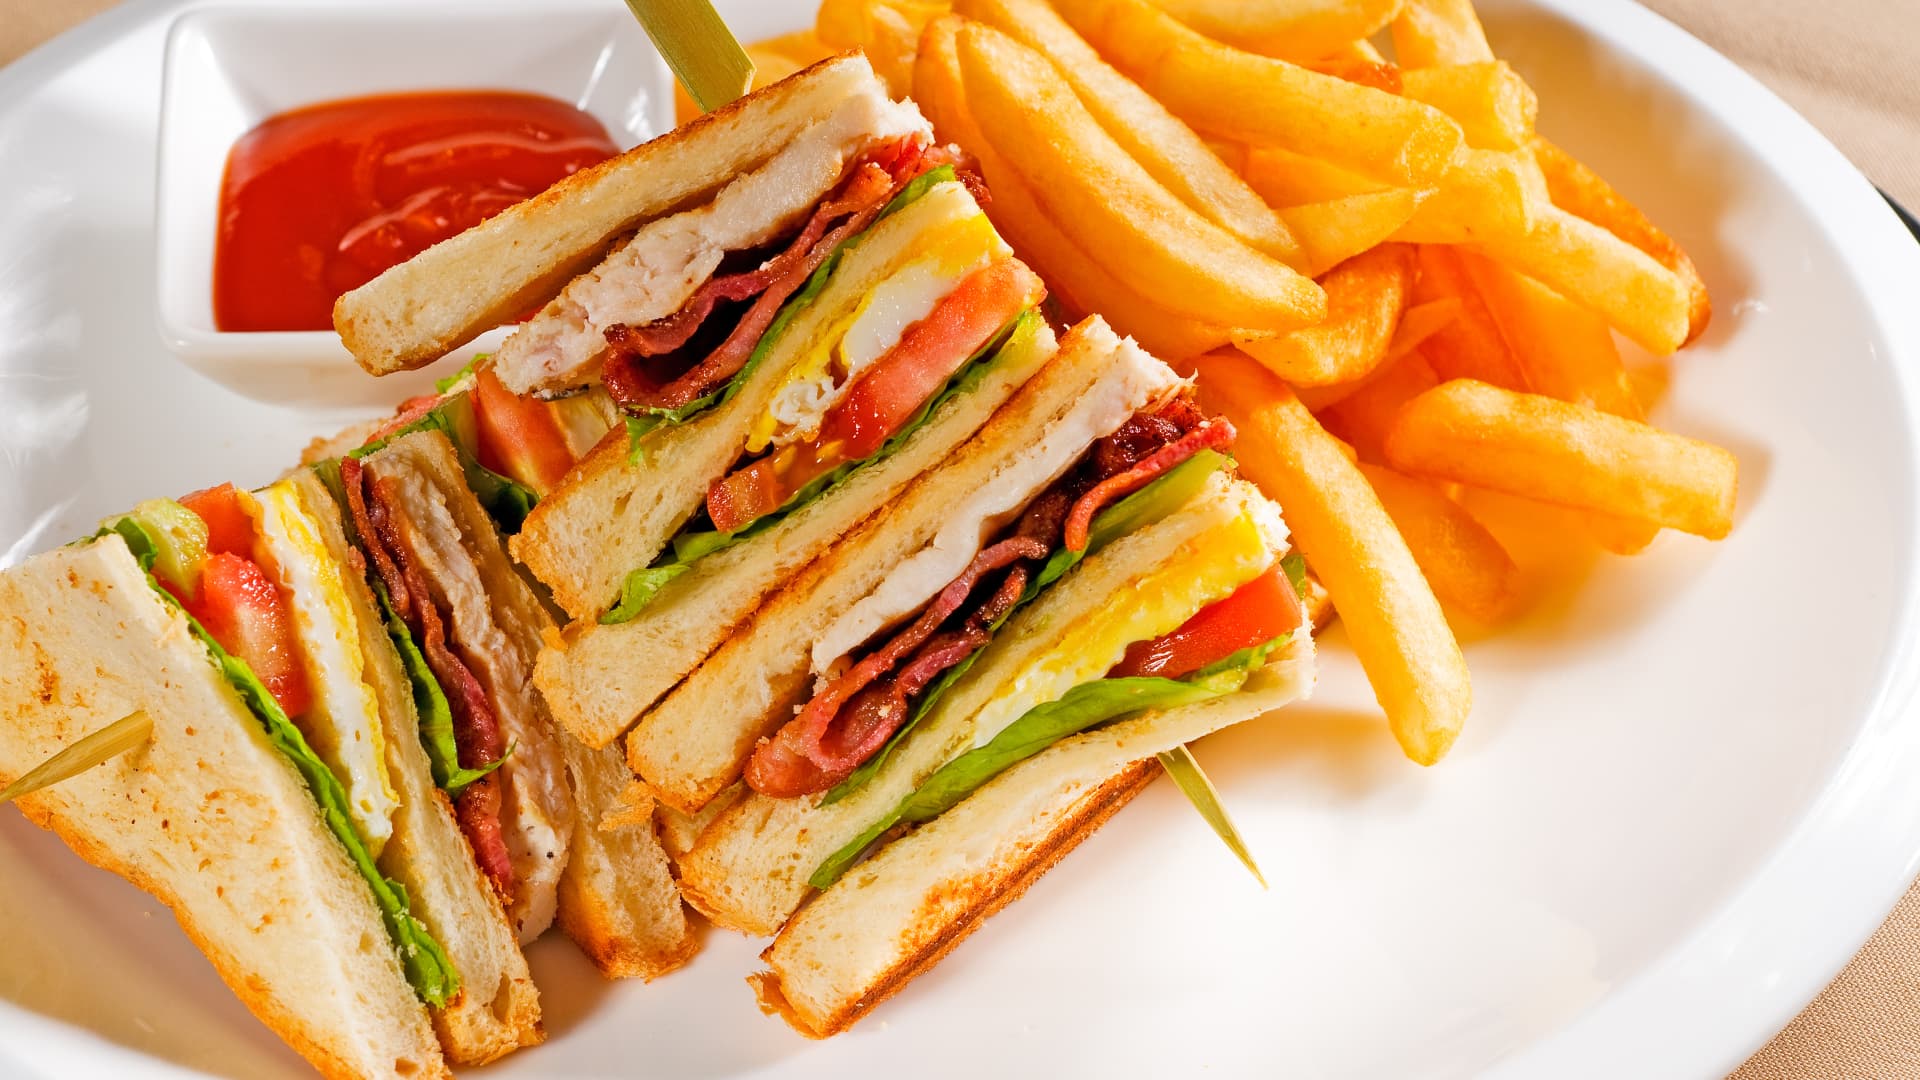 What your club sandwich says about your living costs